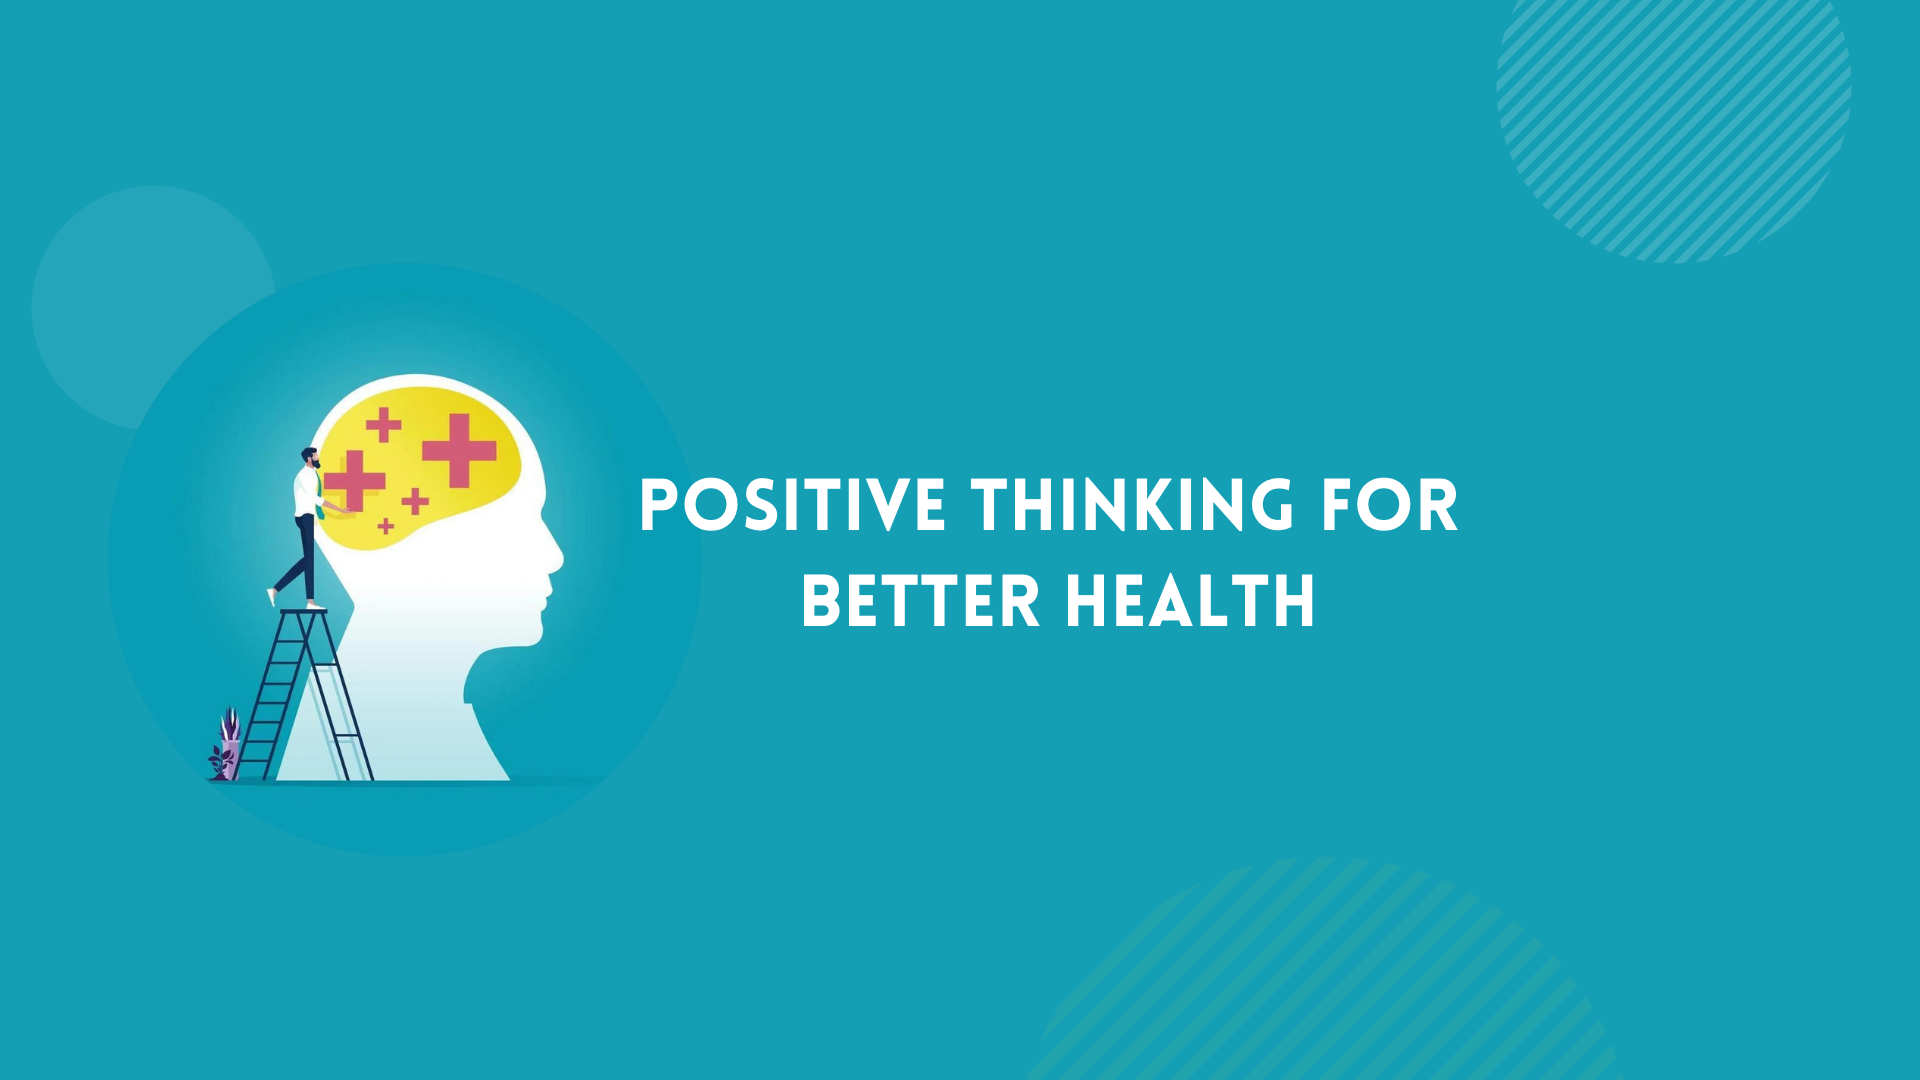 Positive Thinking For Better Health course image